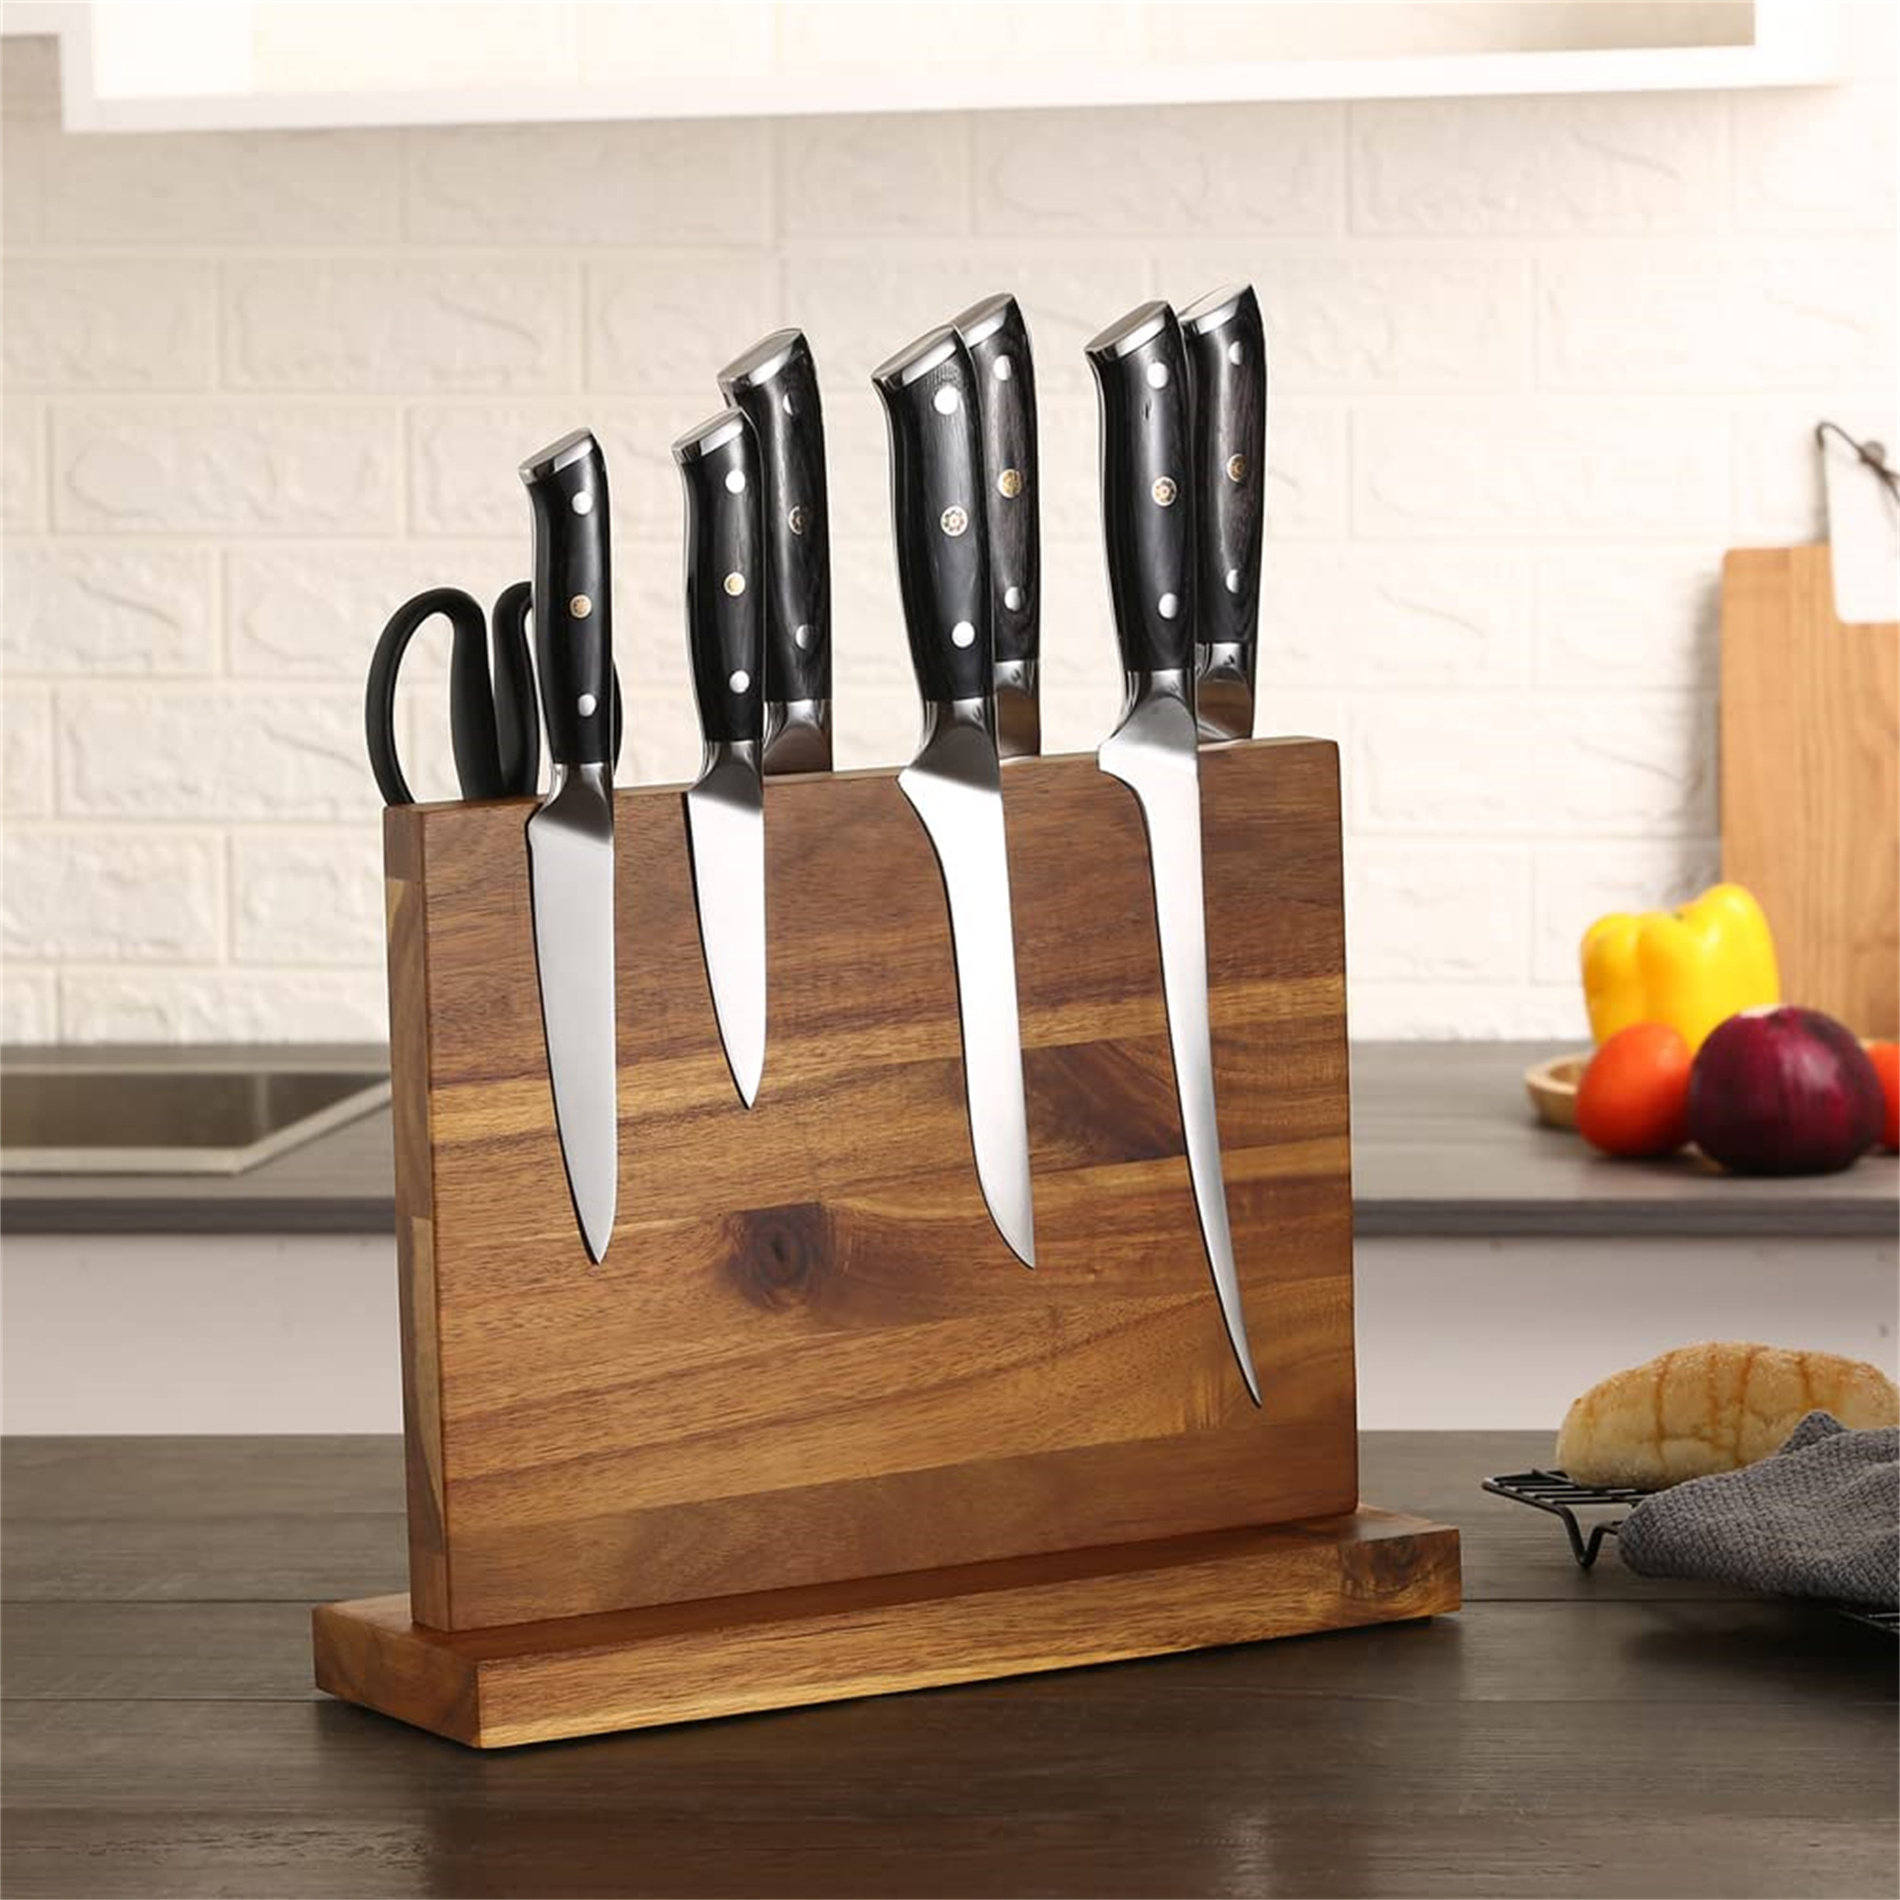 Knife Block Rubberwood - Knife Holder - Knife Block Without Knives -  Suitable for 5 Different Knives - Knife Holder for An Organized And Tidy  Kitchen